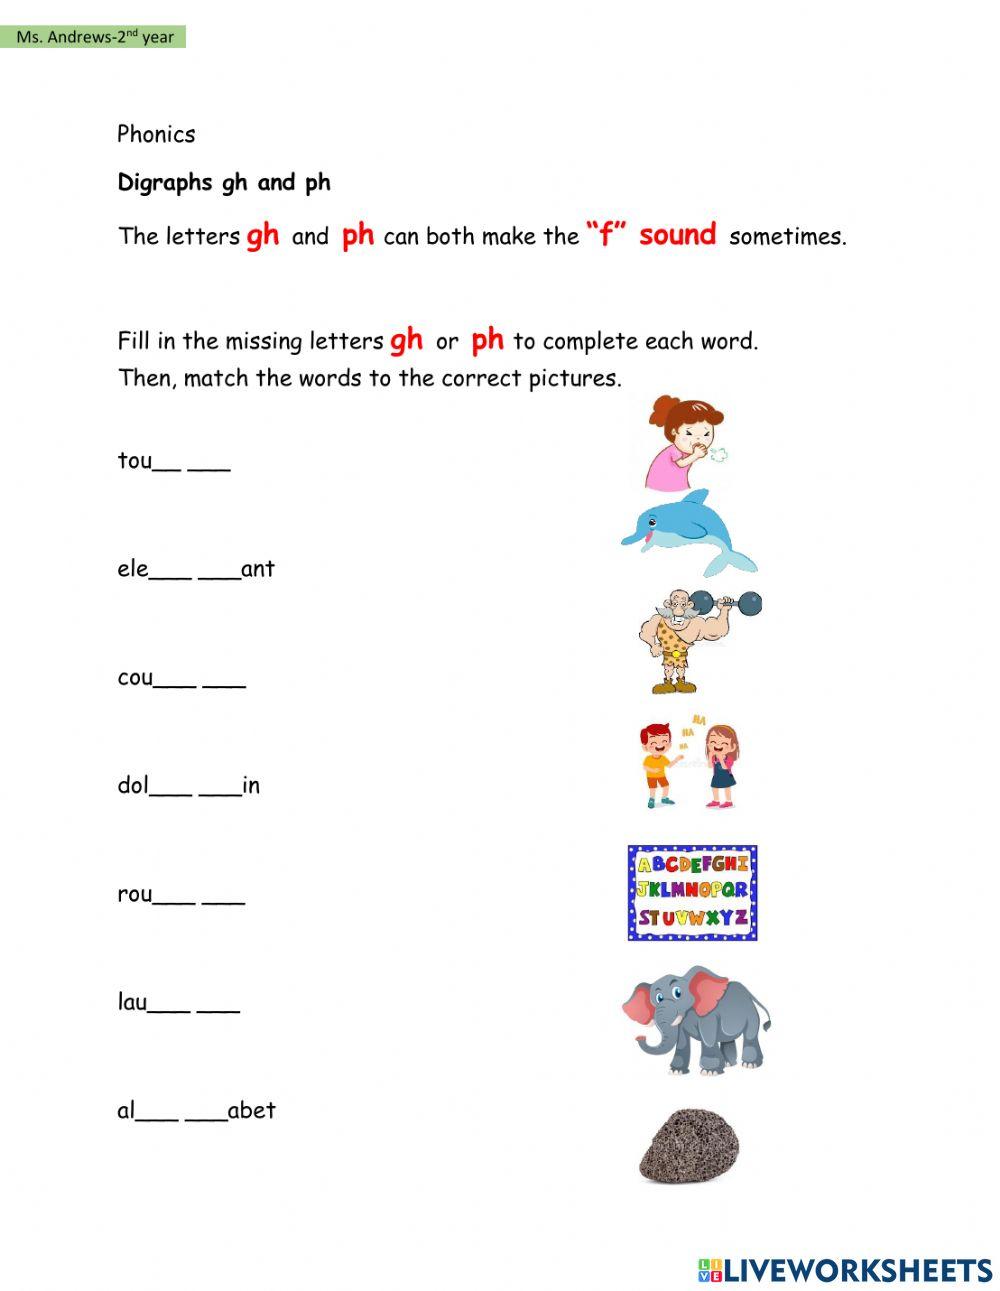 Digraphs- gh and ph